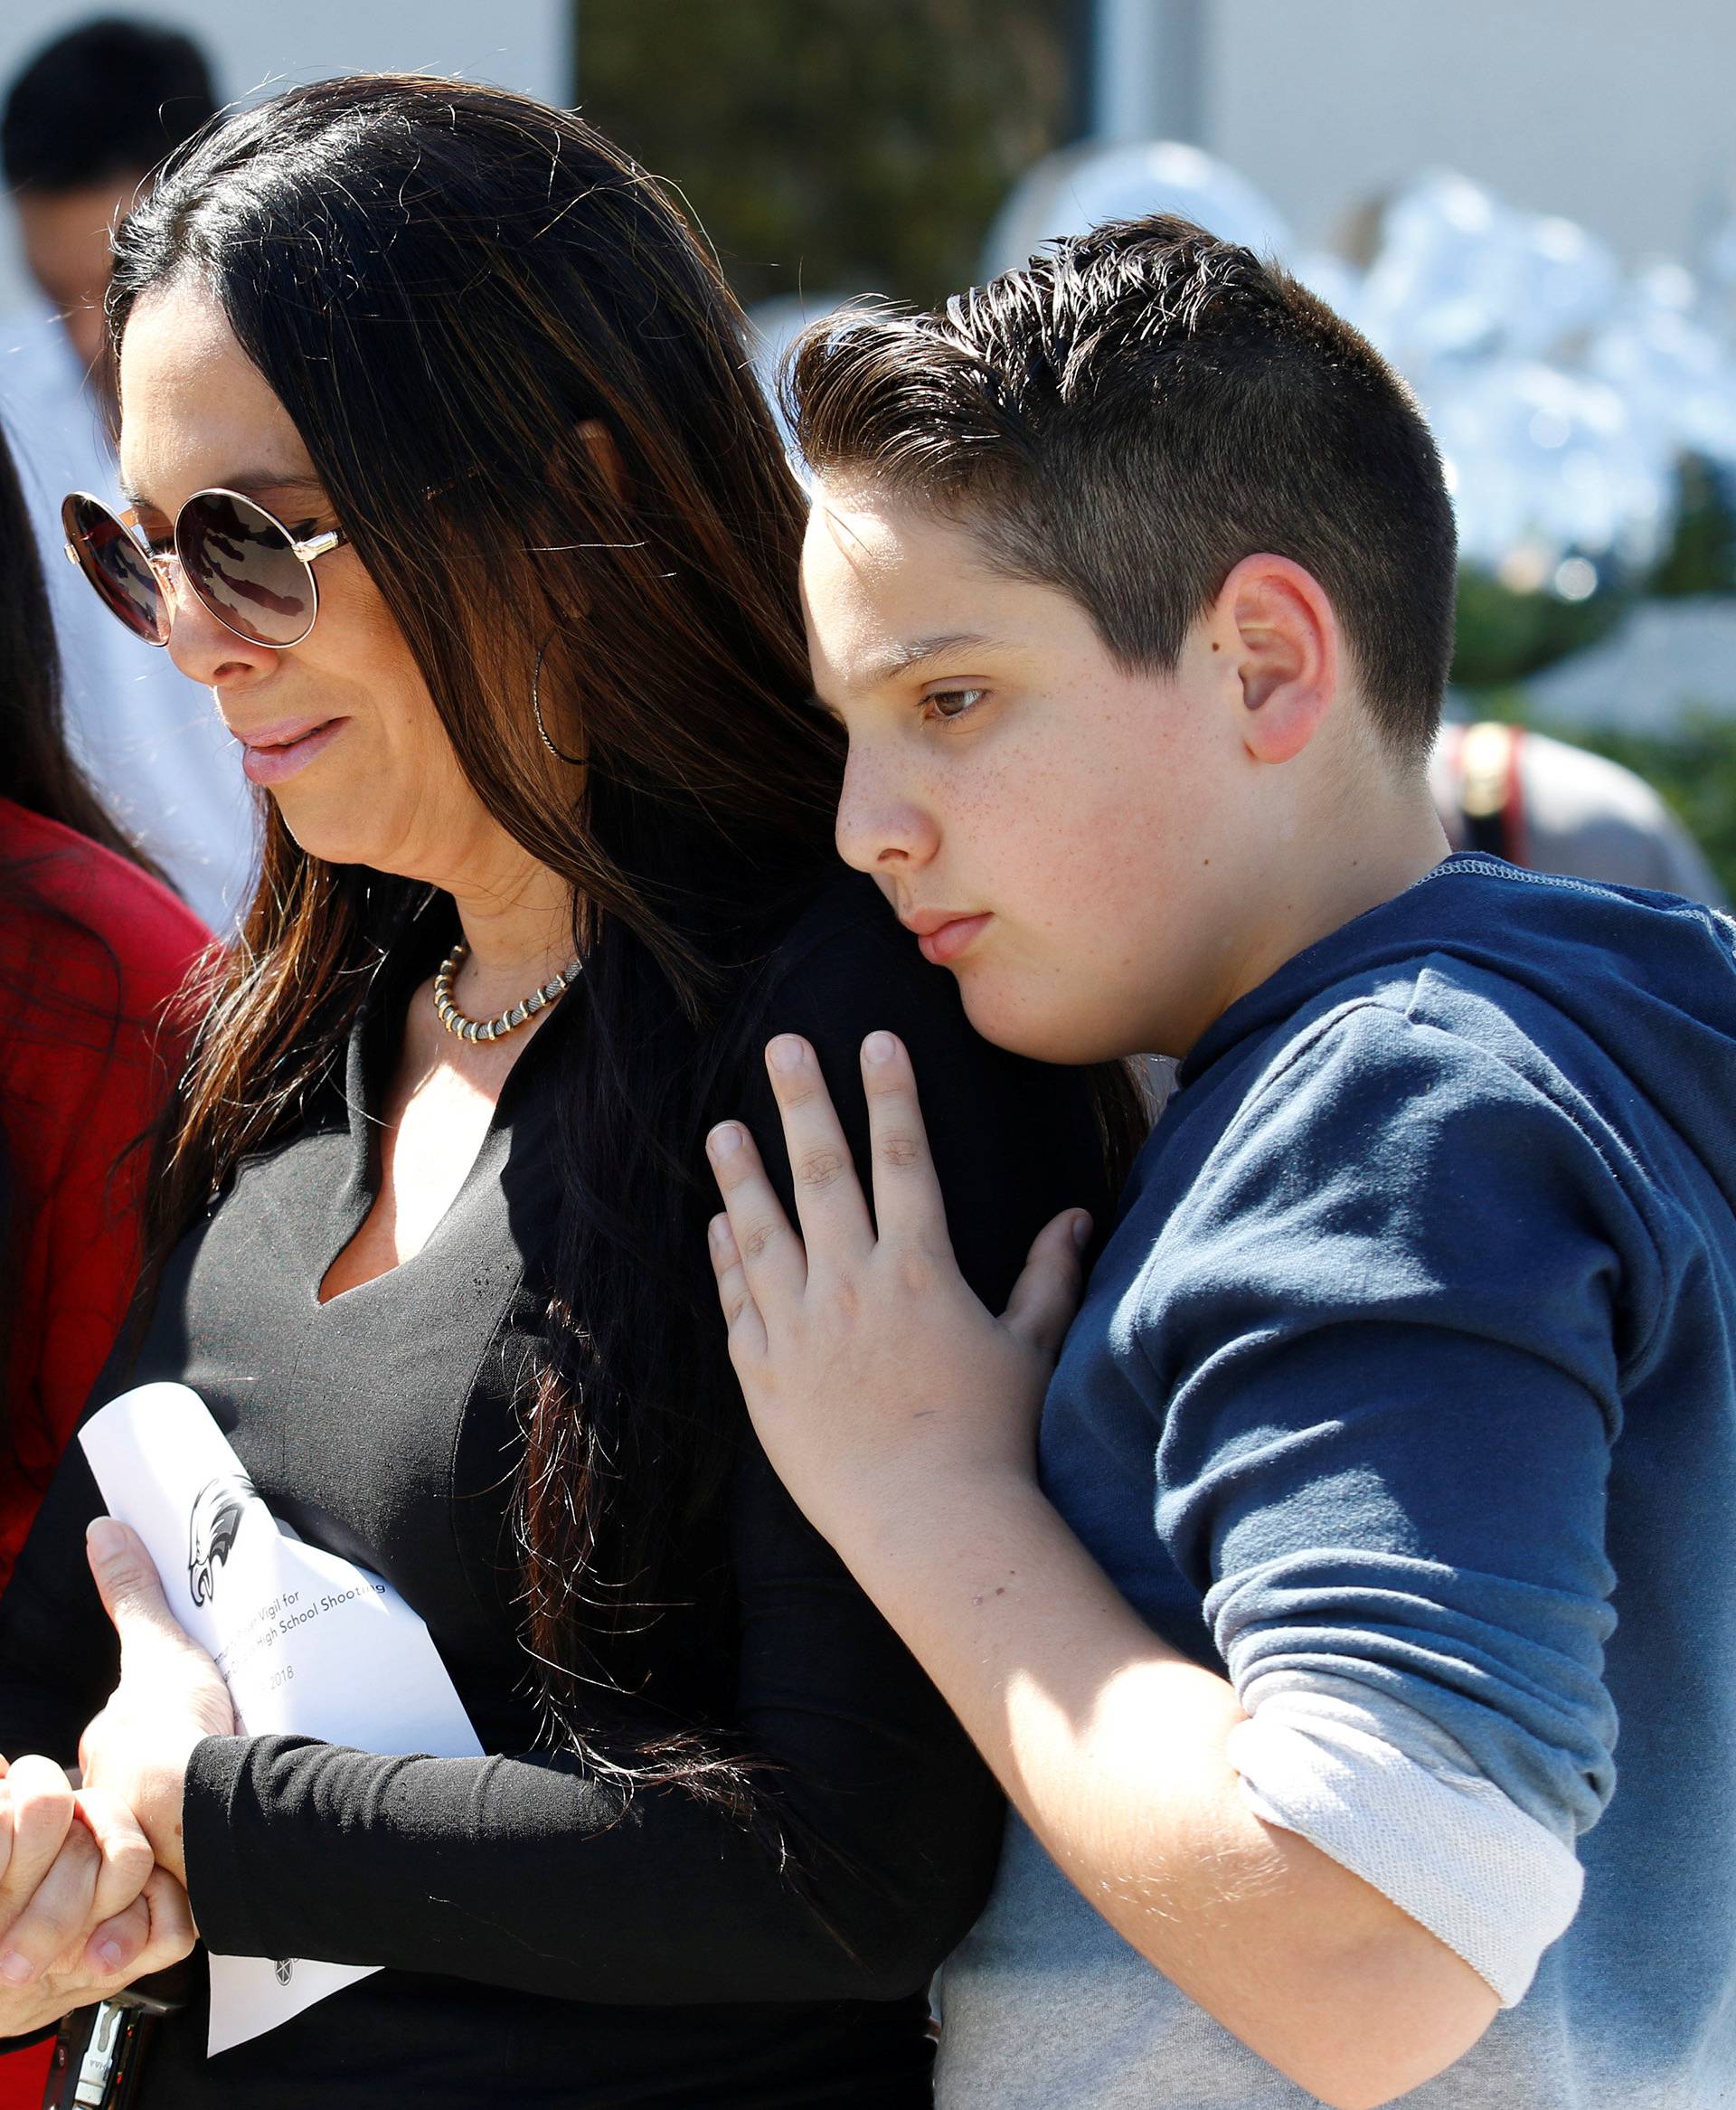 Students and parents from Marjory Stoneman Douglas High School attend a memorial following a school shooting incident in Parkland